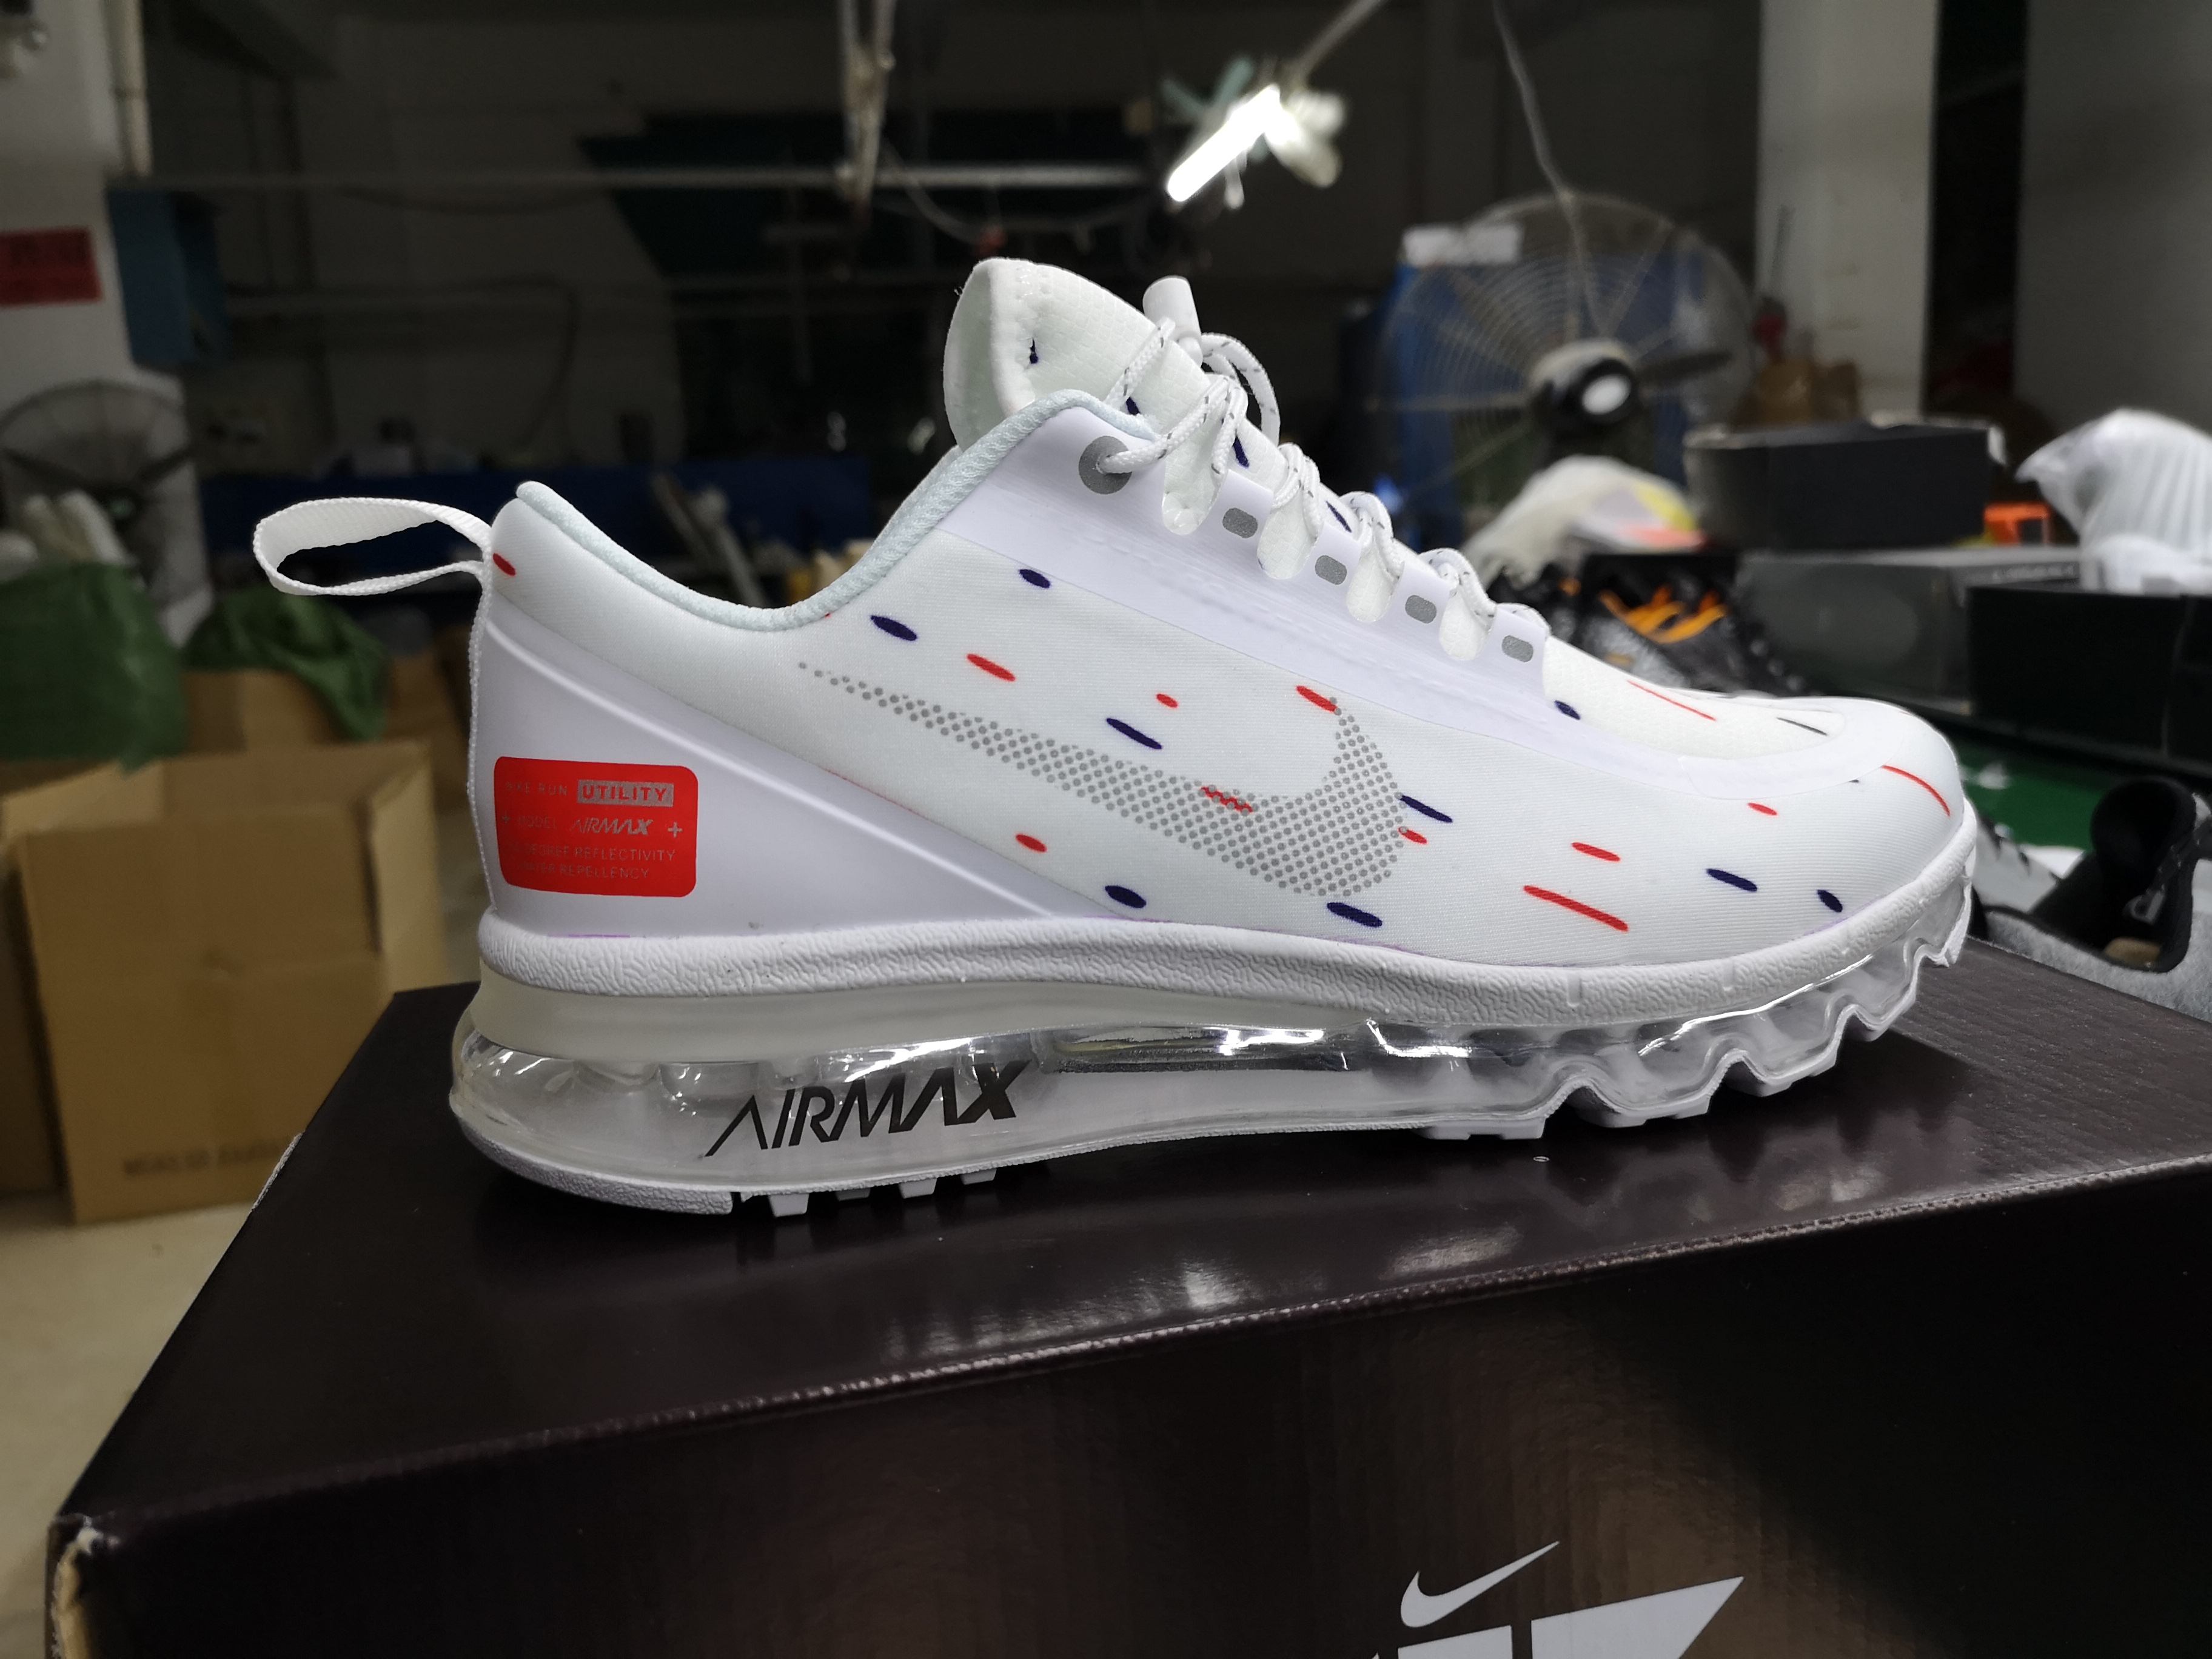 Nike Air Max 2017 Waterproof White Silver Shoes